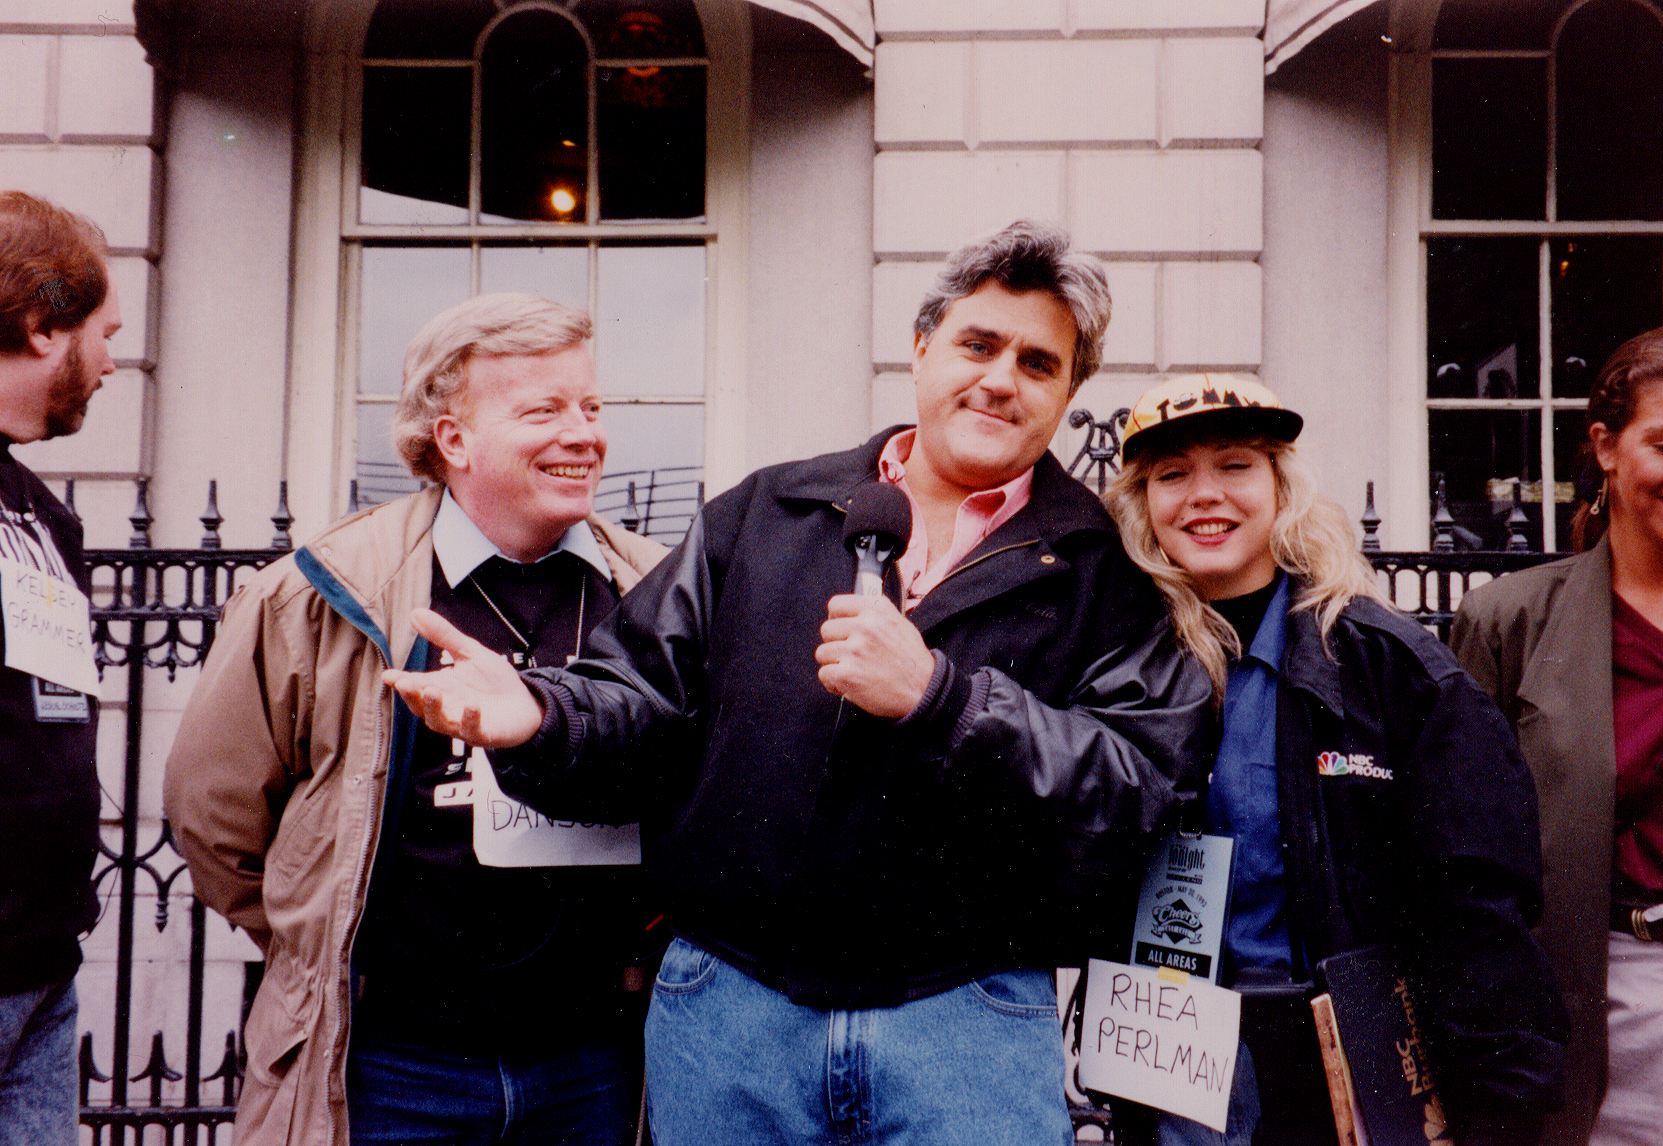 With Jay Leno on location in Boston at The Bull & Finch (Cheers Bar).